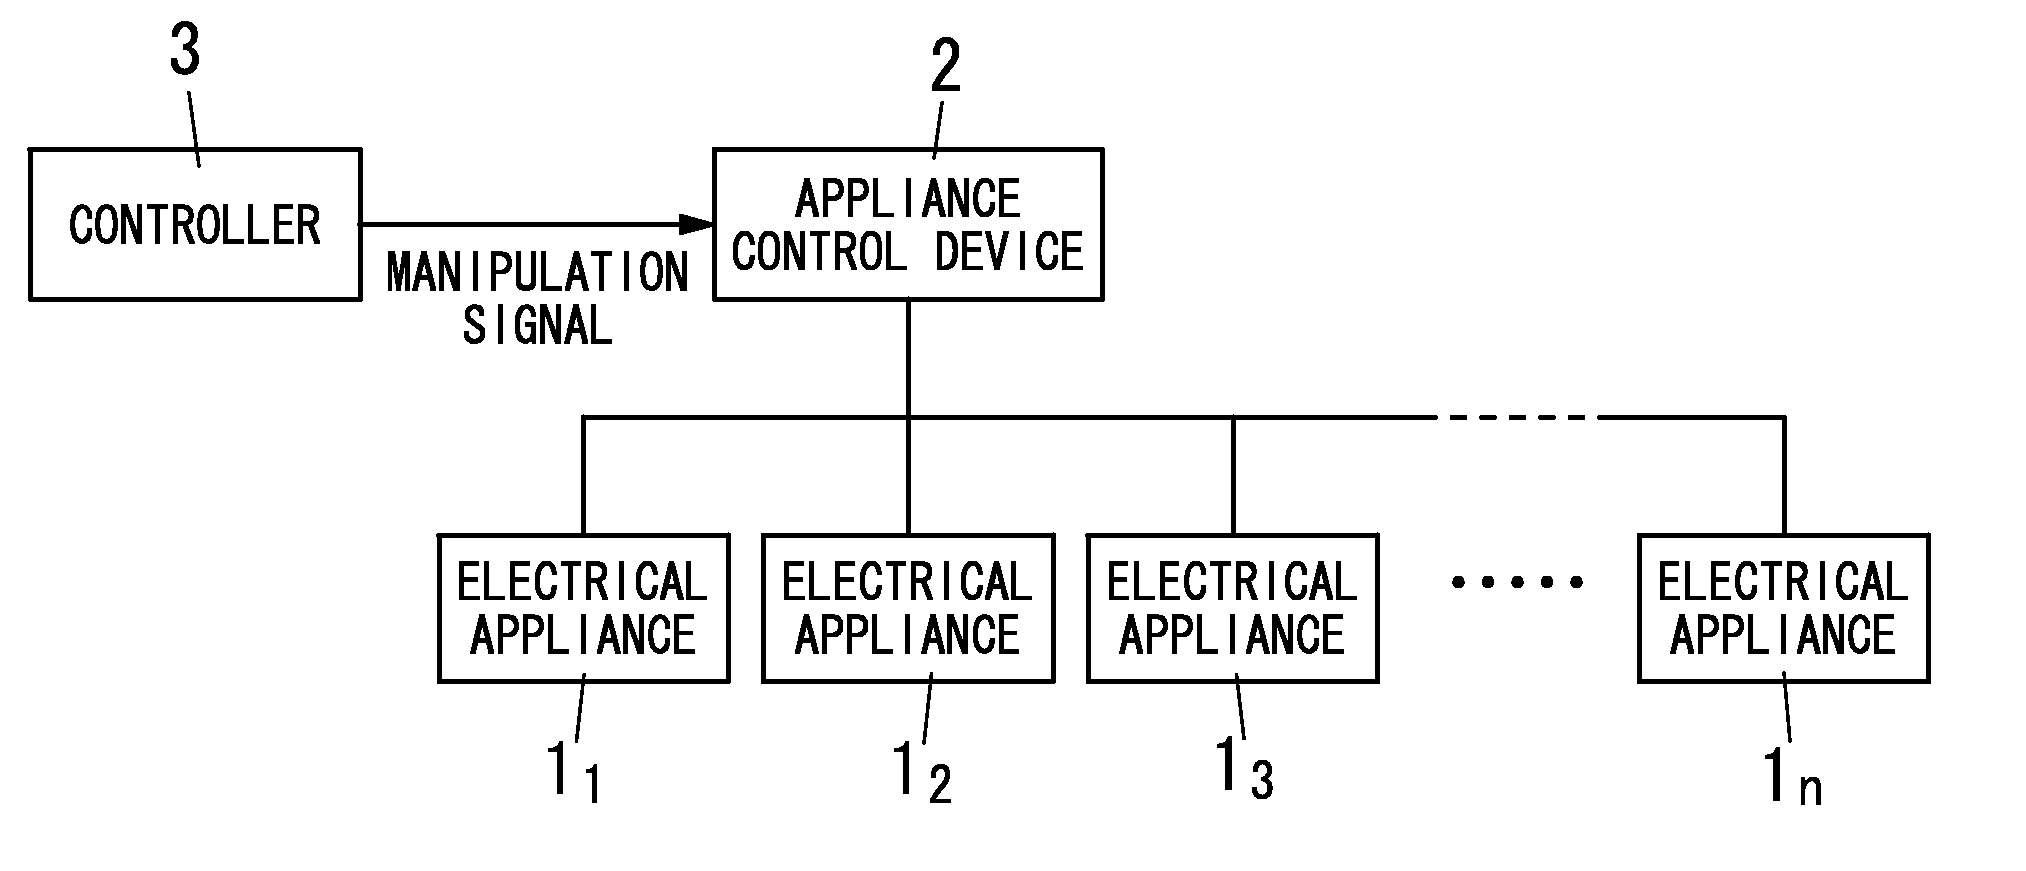 Appliance control system